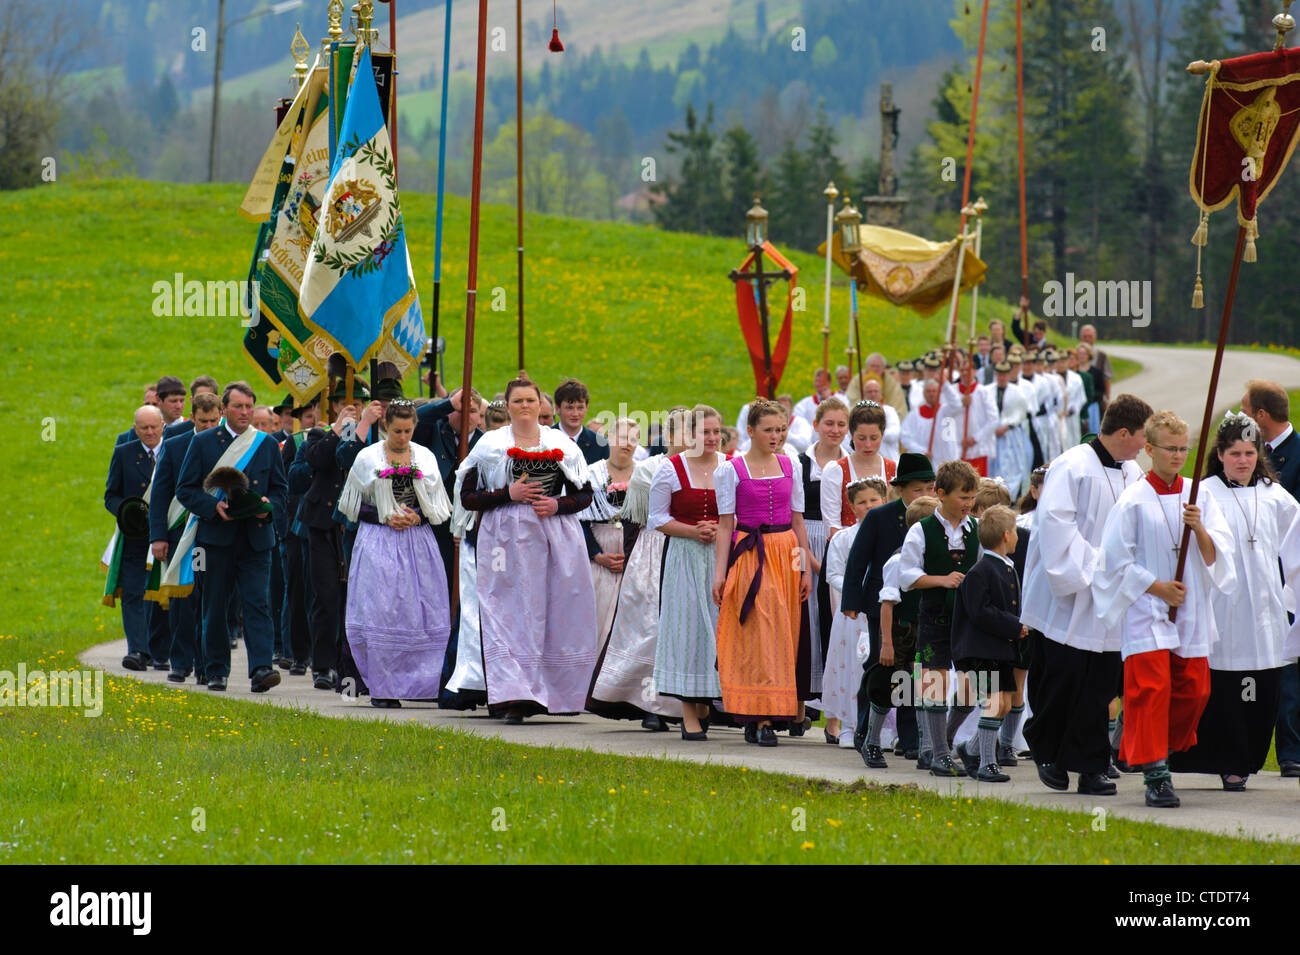 traditional-and-catholic-procession-in-bavaria-germany-in-village-CTDT74.jpg